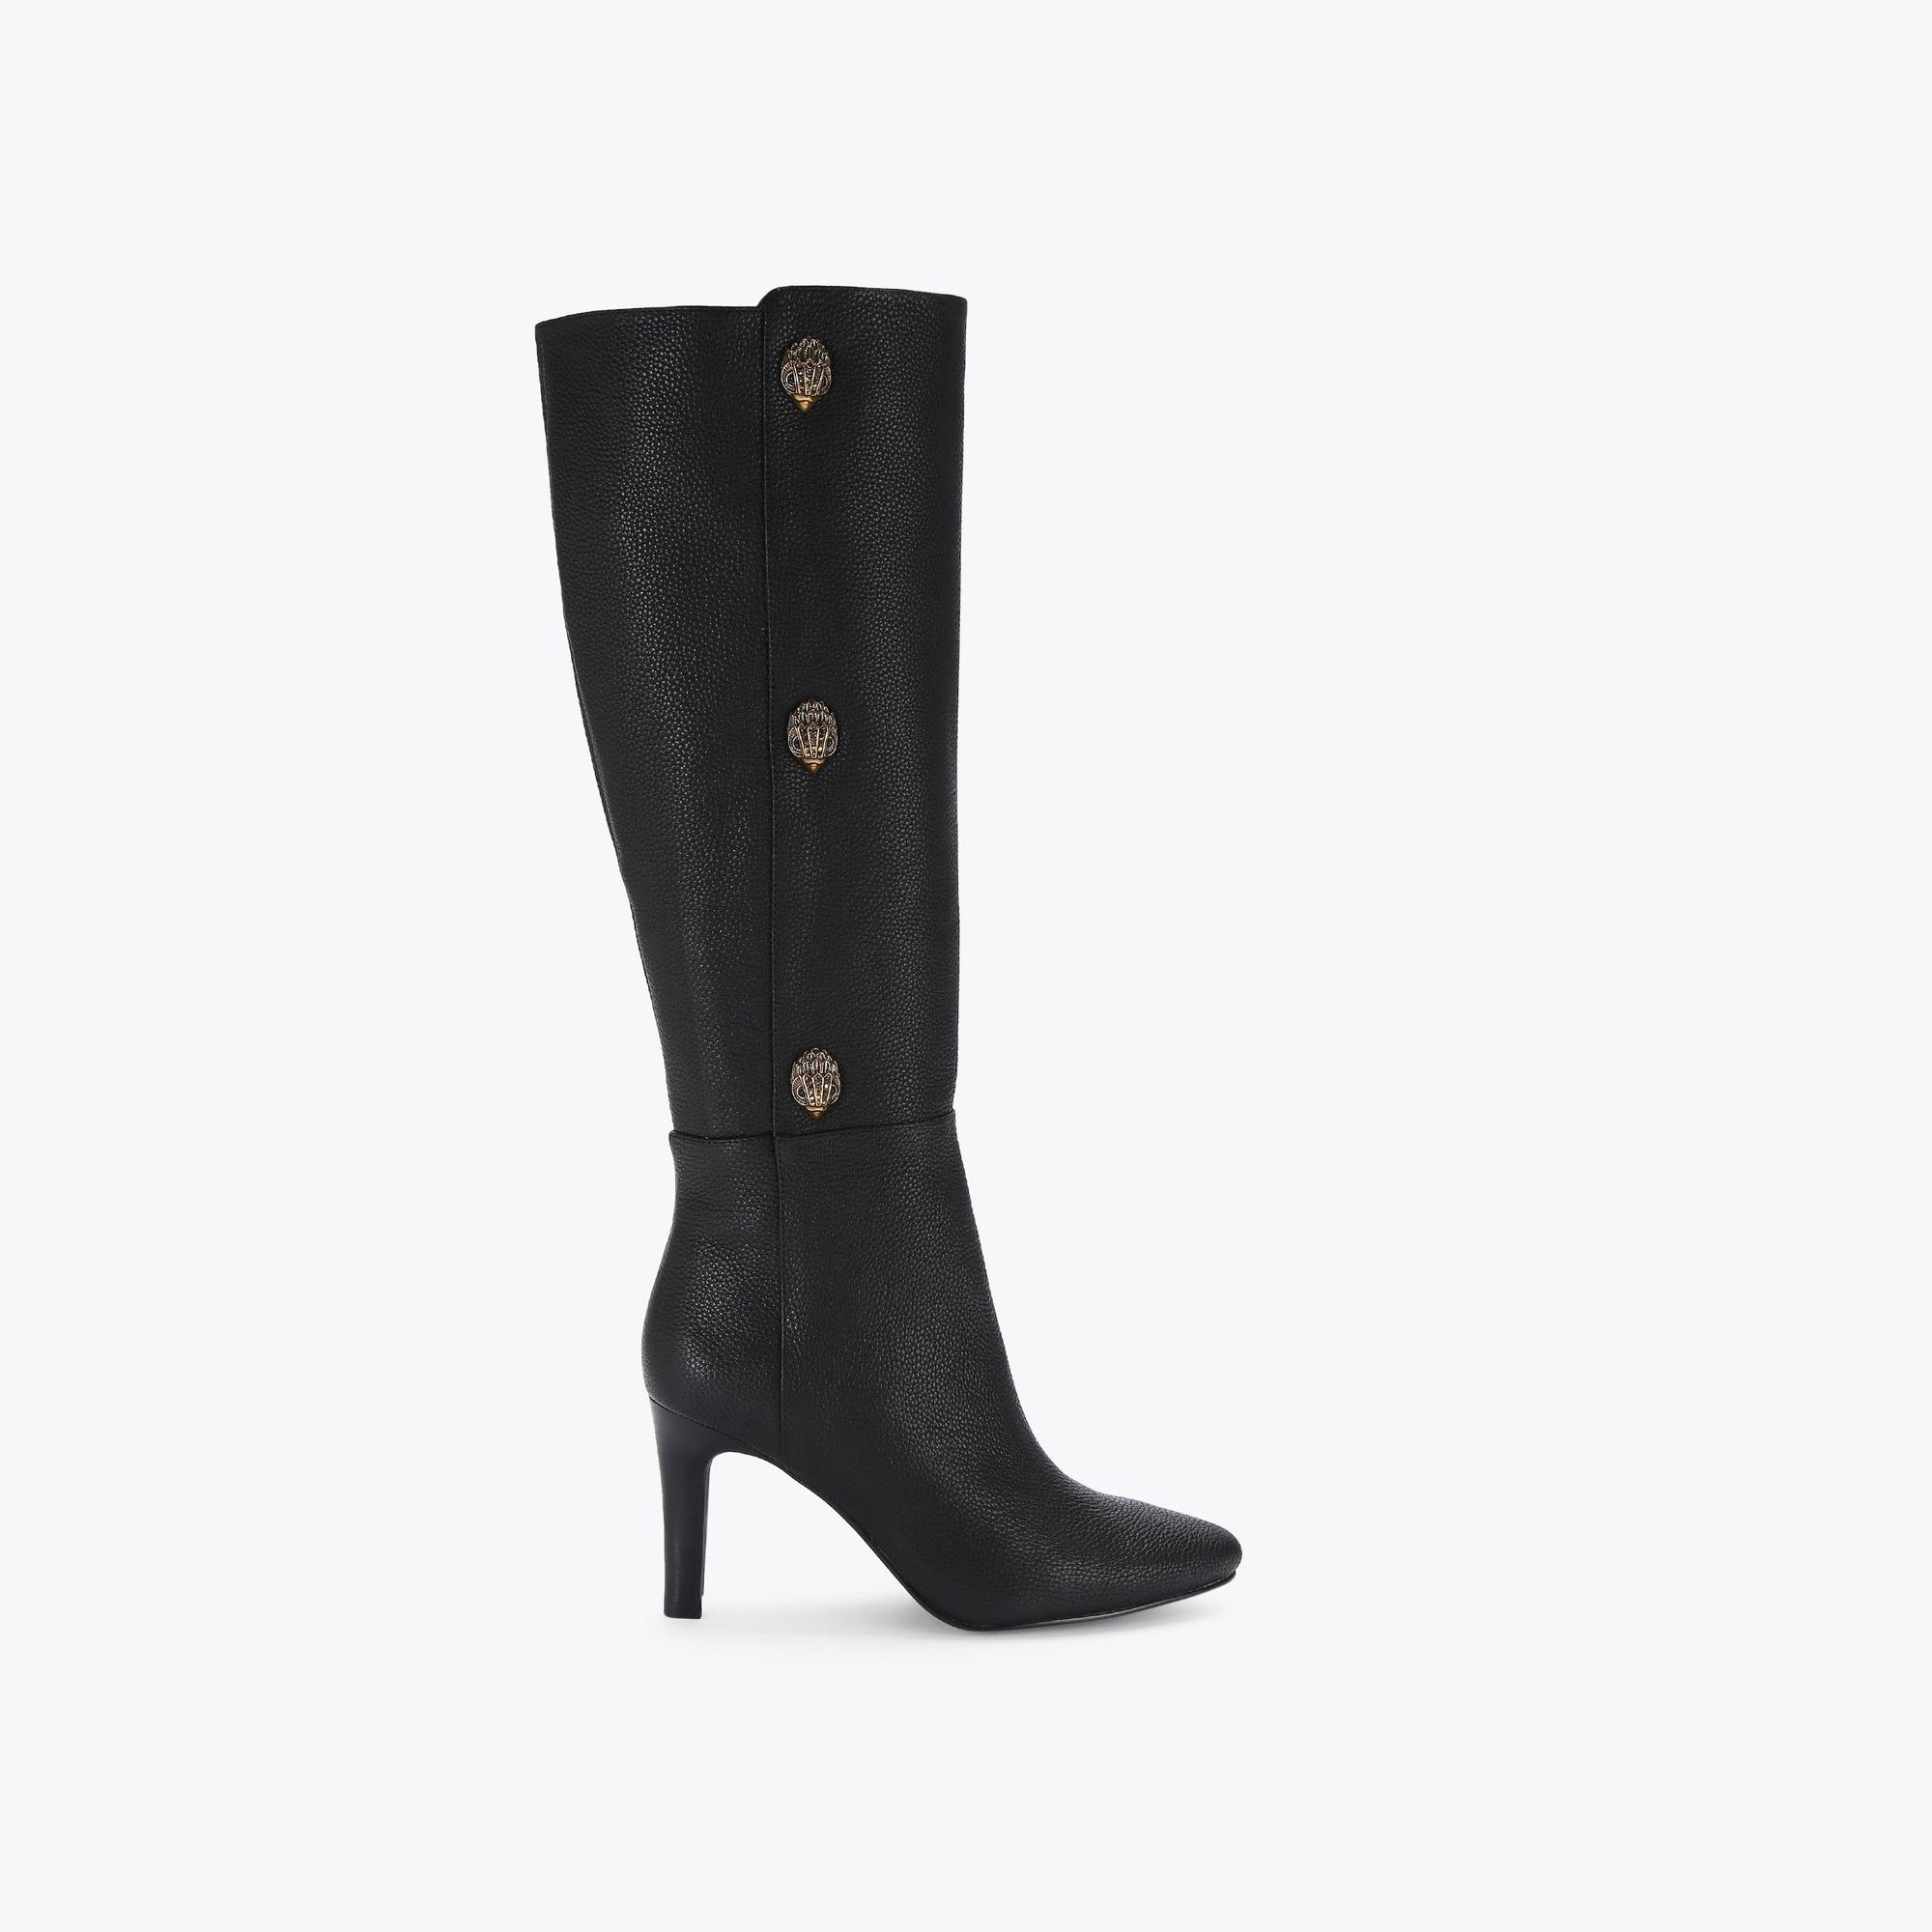 Louise et Cie Fabric Boots for Women